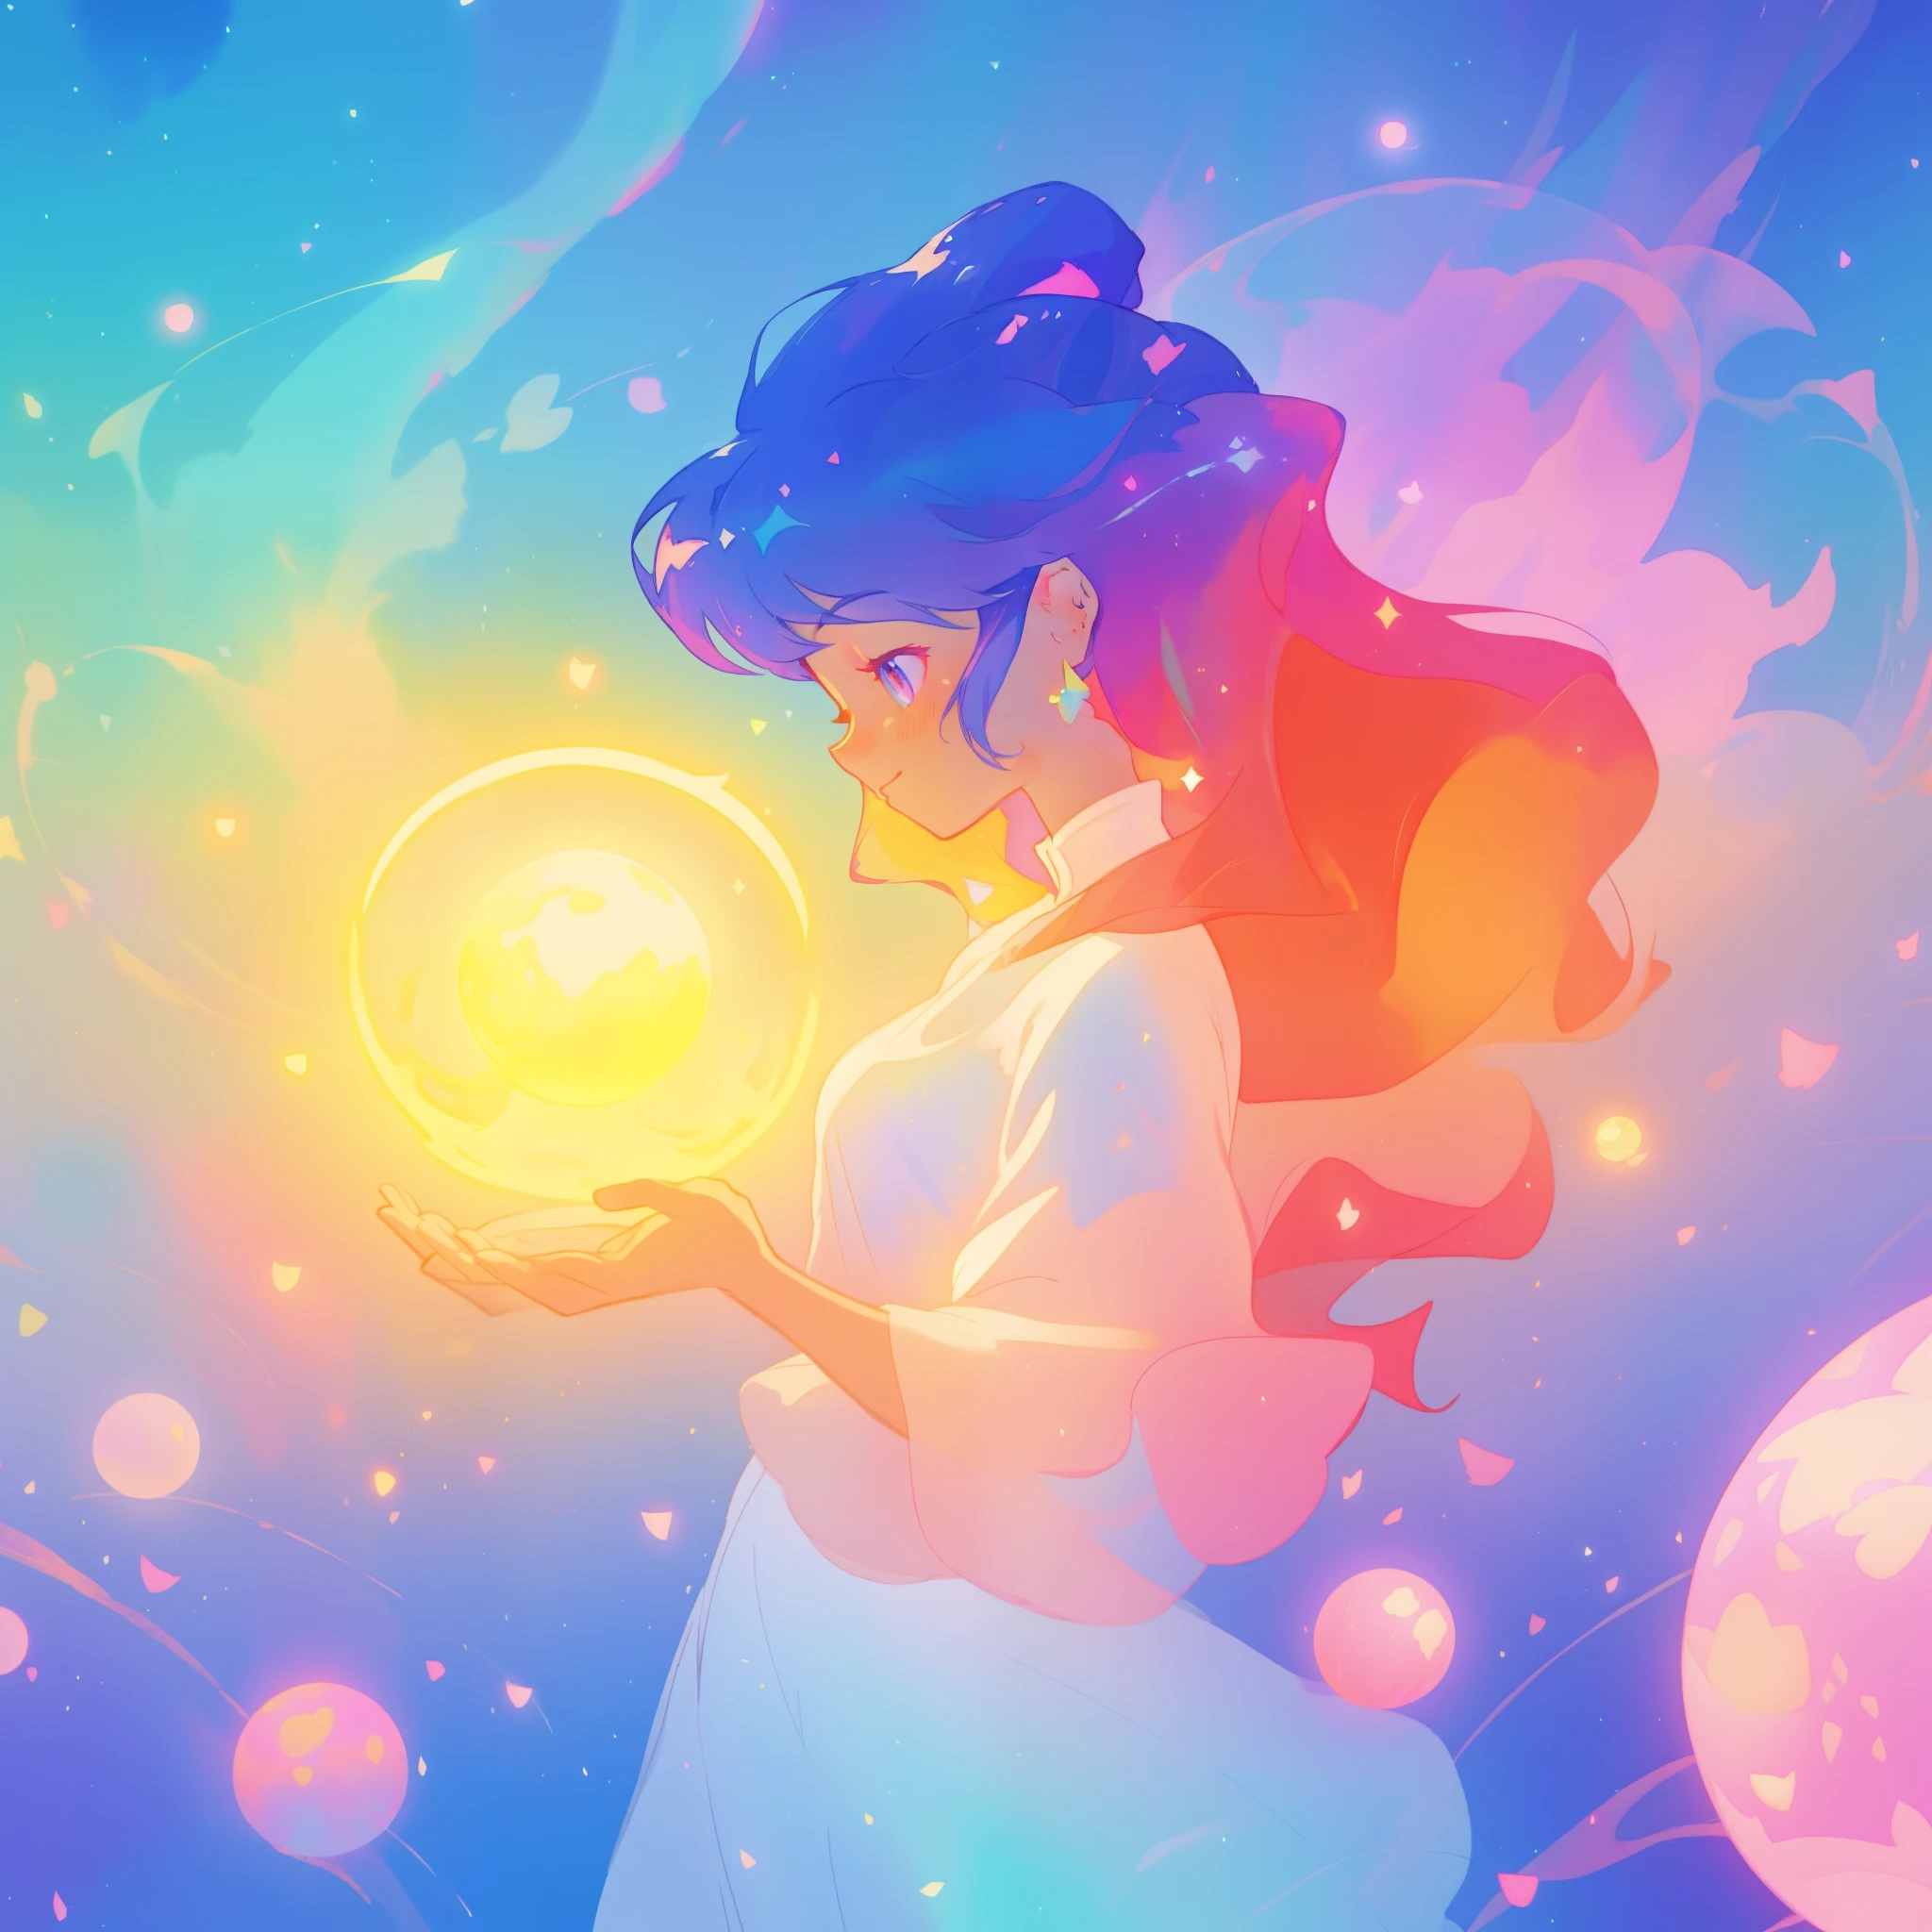 beautiful girl in sparkling white dress holding a glowing magical sphere, glowing ballgown, (magical, whimsical), (magical orb), long flowing colorful hair, colorful fantasia background, watercolor illustration, disney art style, glowing aura around her, glowing lights, beautiful digital illustration, fantasia otherworldly landscape plants flowers, beautiful, masterpiece, best quality, anime disney style, (perfect hands), profile view, eyes closed, looking at the orb